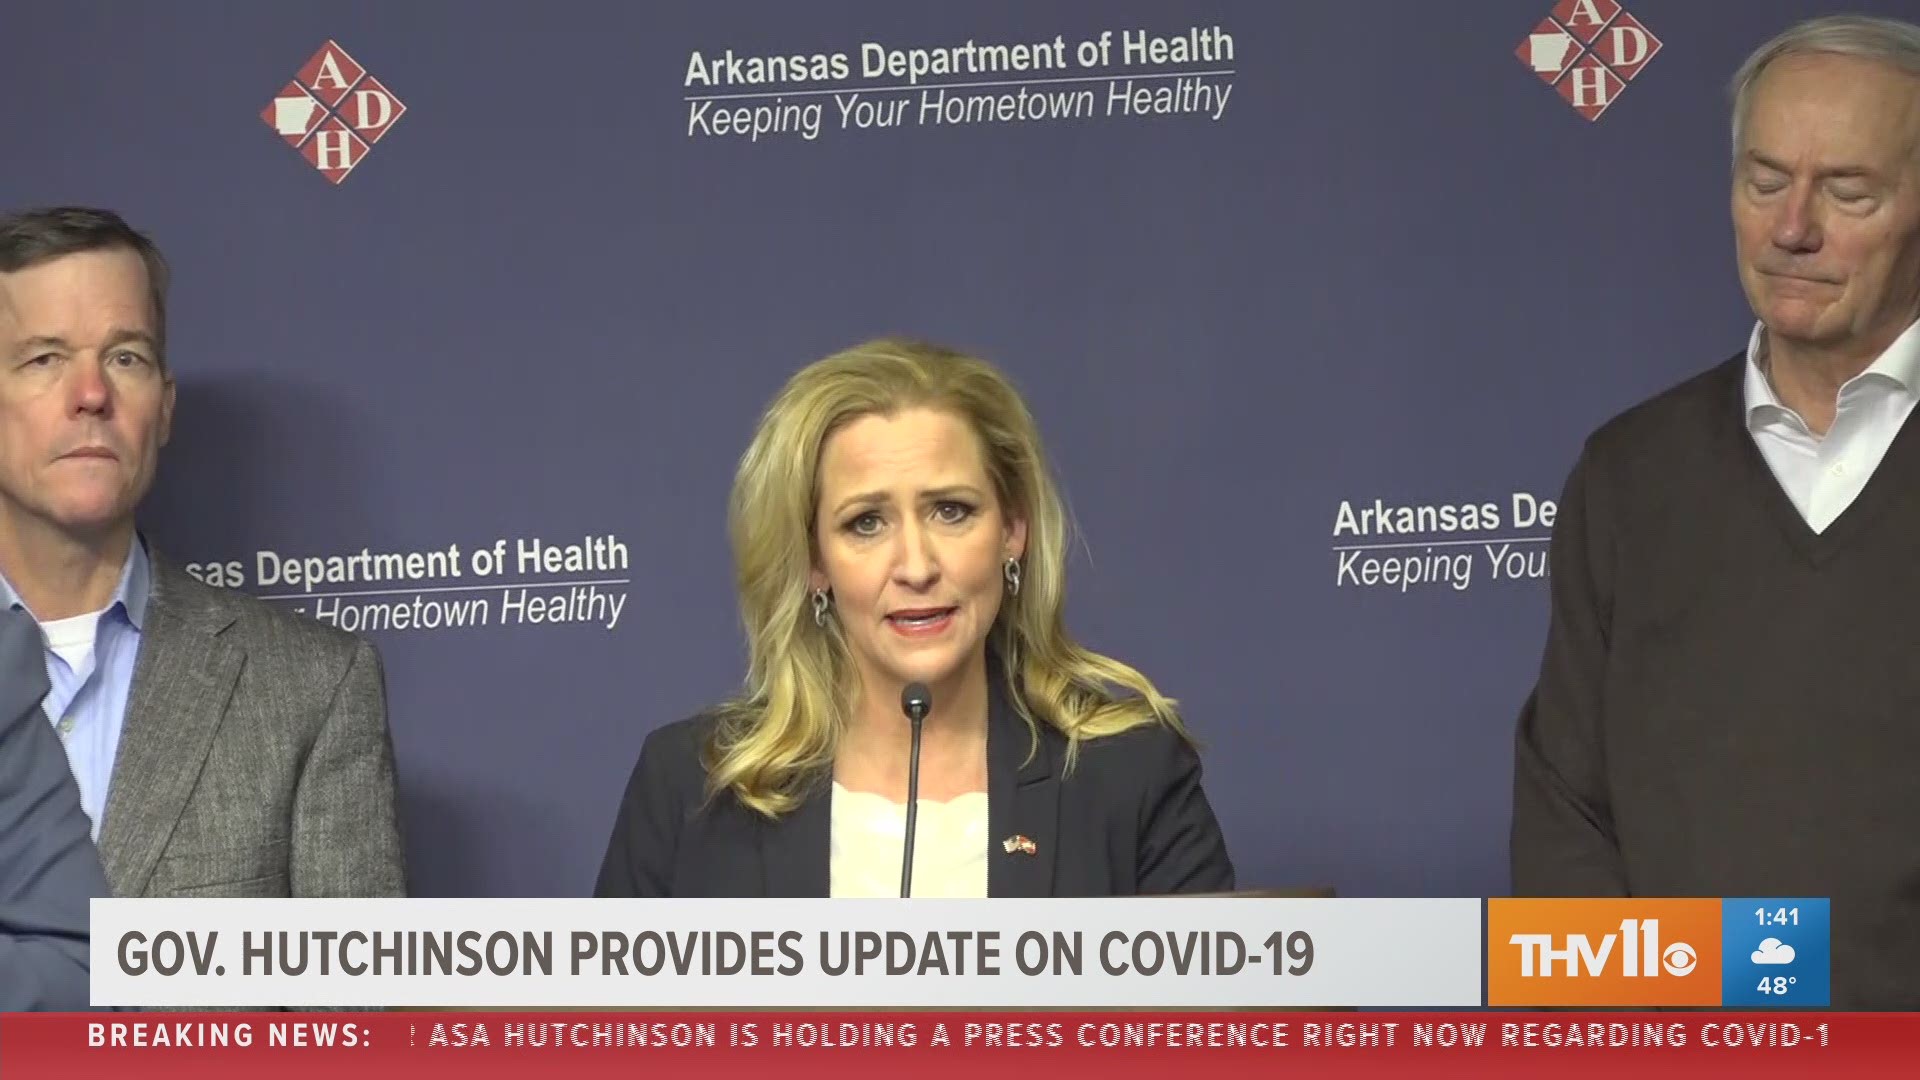 Attorney General Leslie Rutledge said the consequences are harsh due to businesses and individuals taking advantage of Arkansans in a time of need.